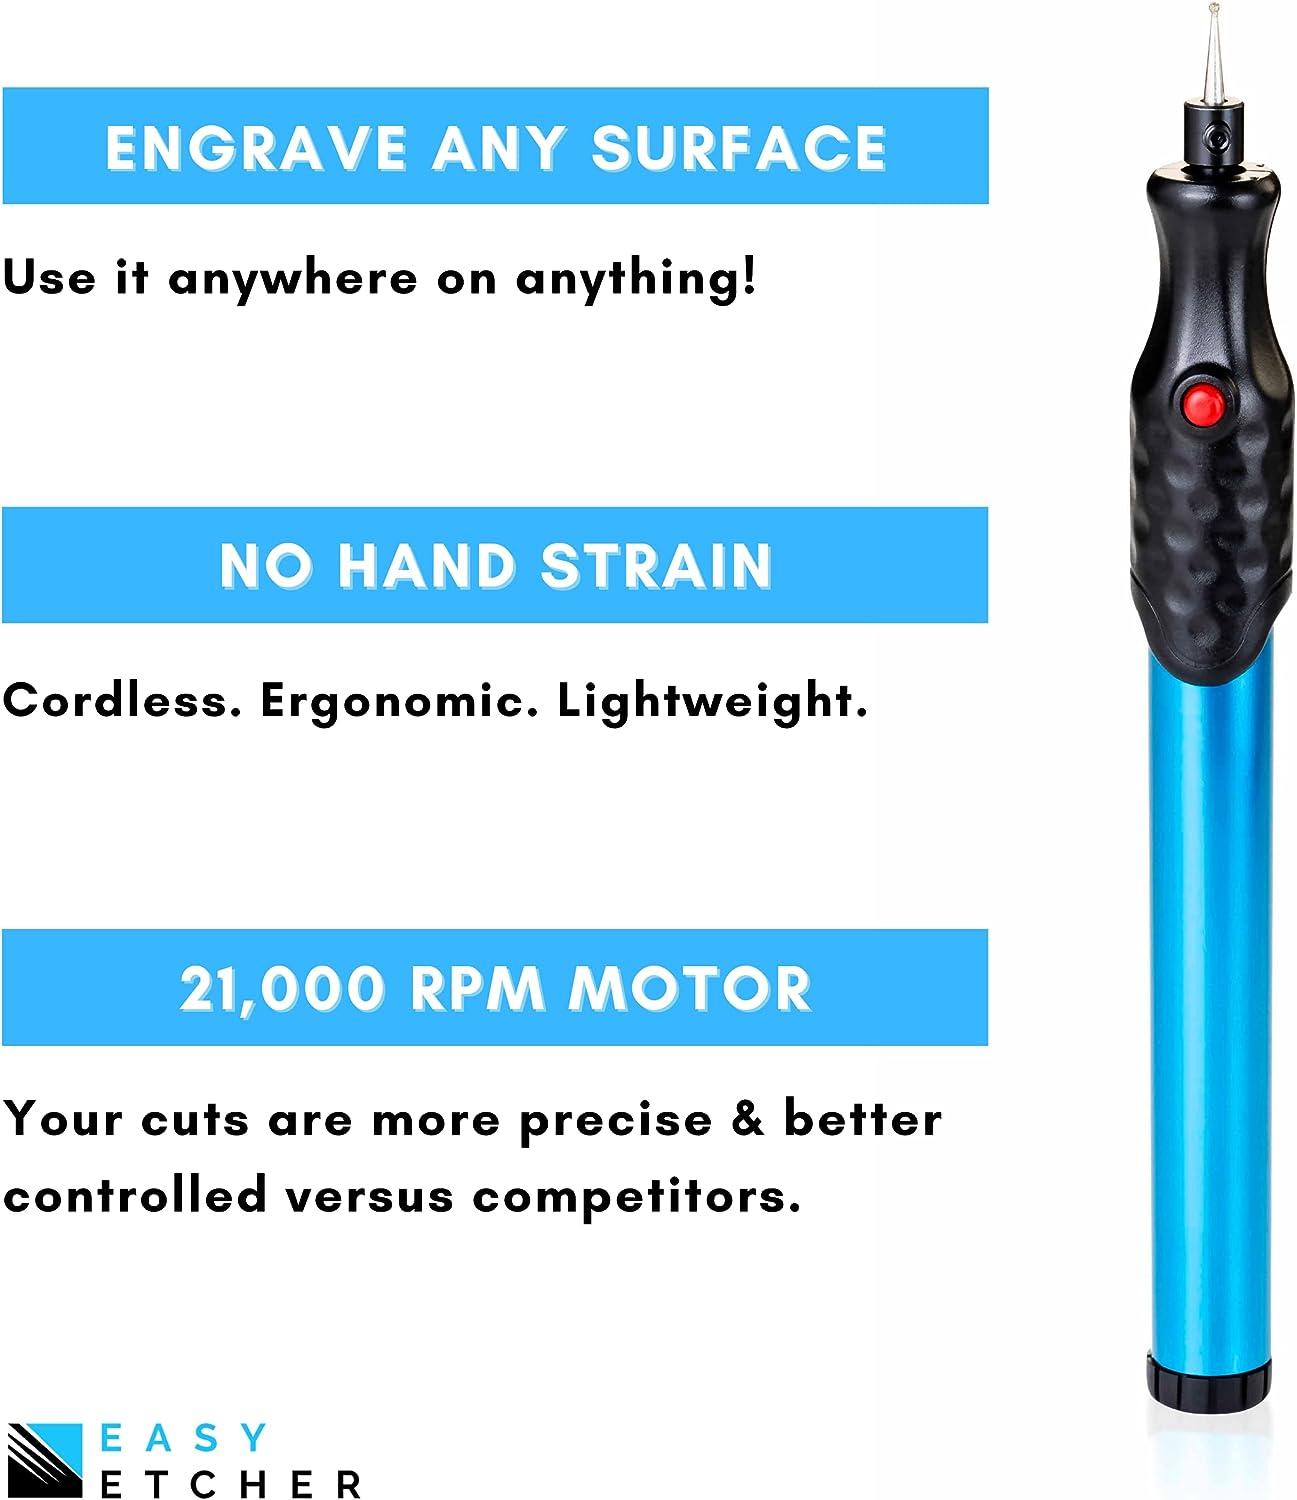 Electric Engraving Pen Carve Tool Mini Engraver Pen For Jewelry